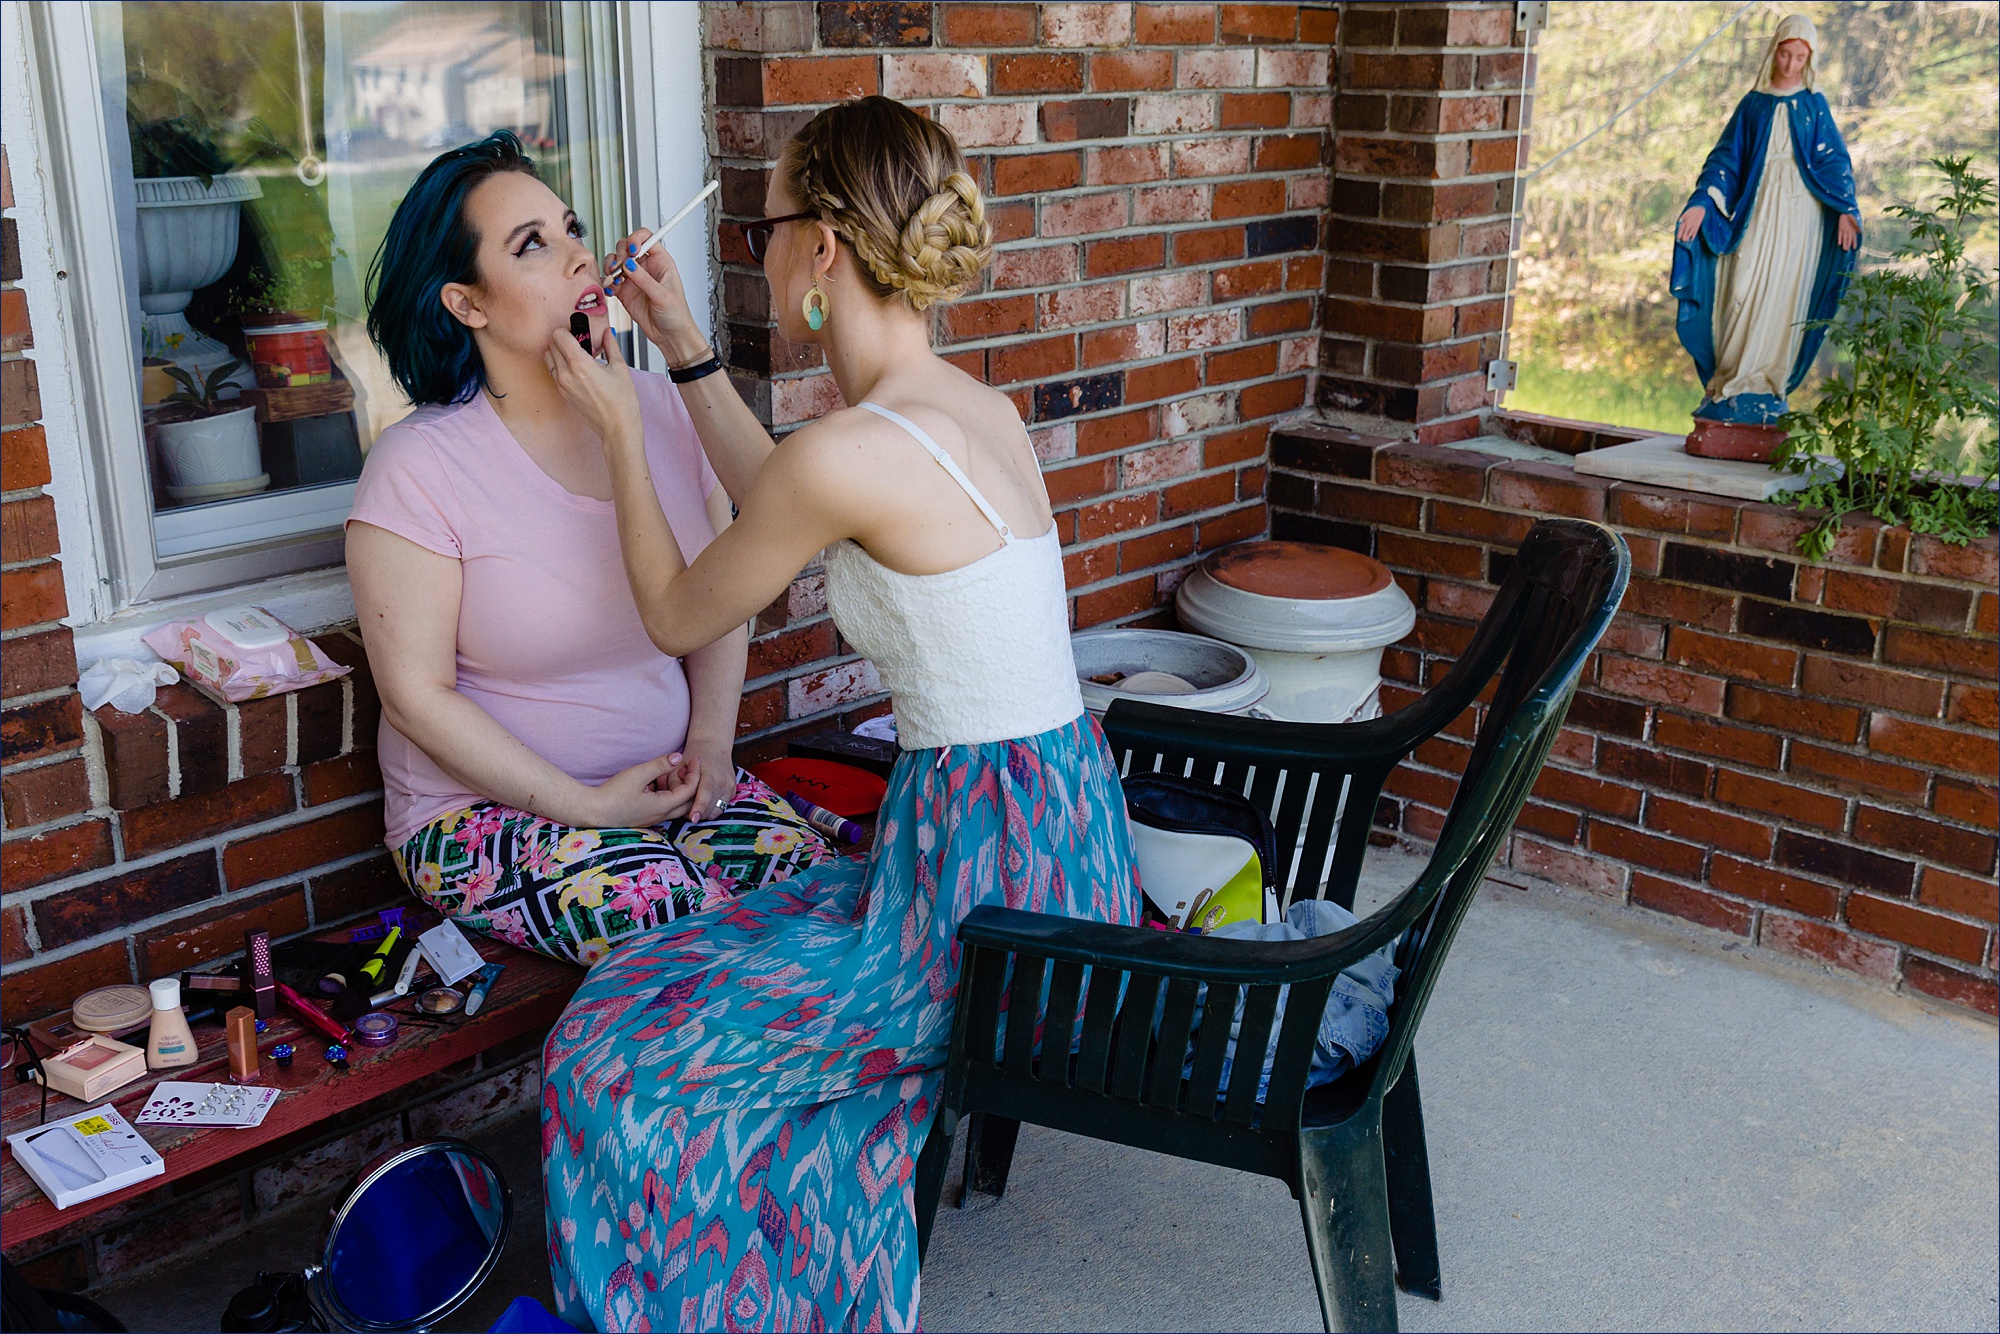 The bride gets her makeup completed on the front porch of the Maine farmhouse while the Virgin Mary watches